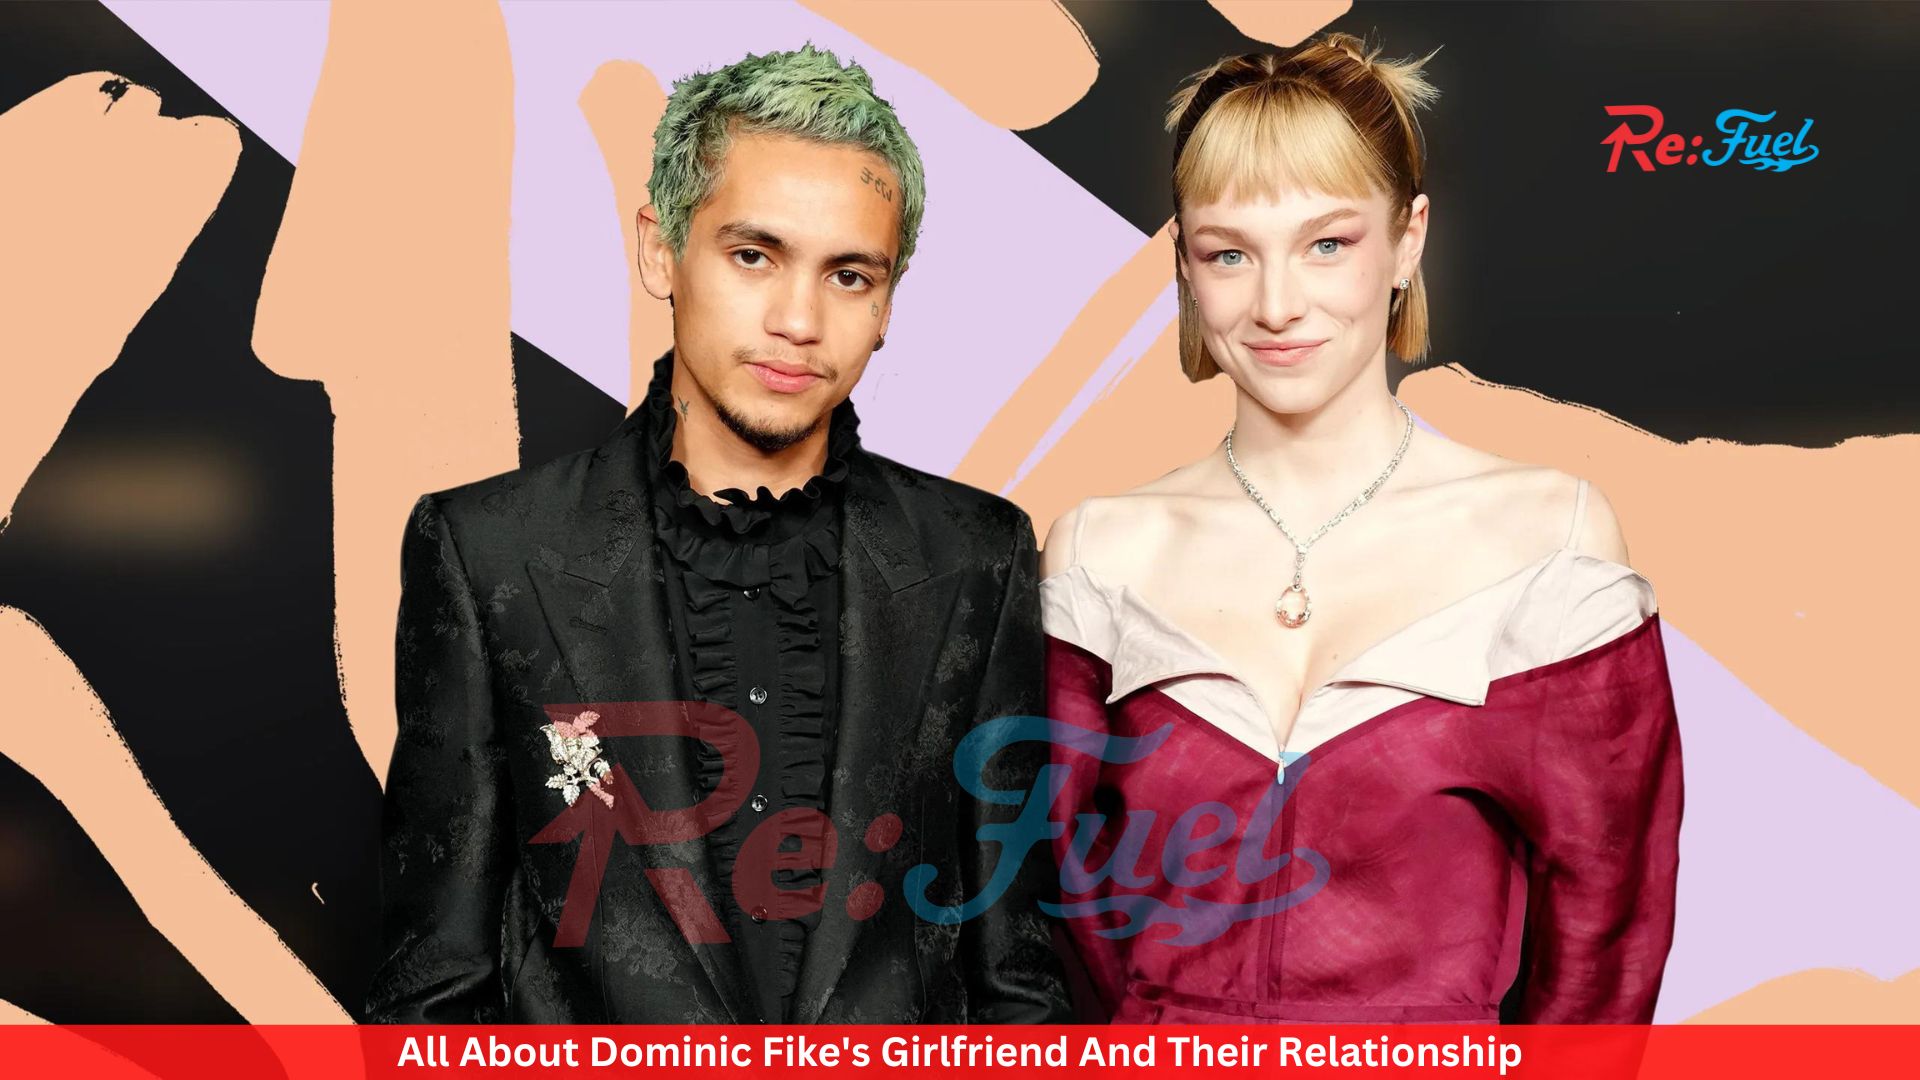 All About Dominic Fike's Girlfriend And Their Relationship